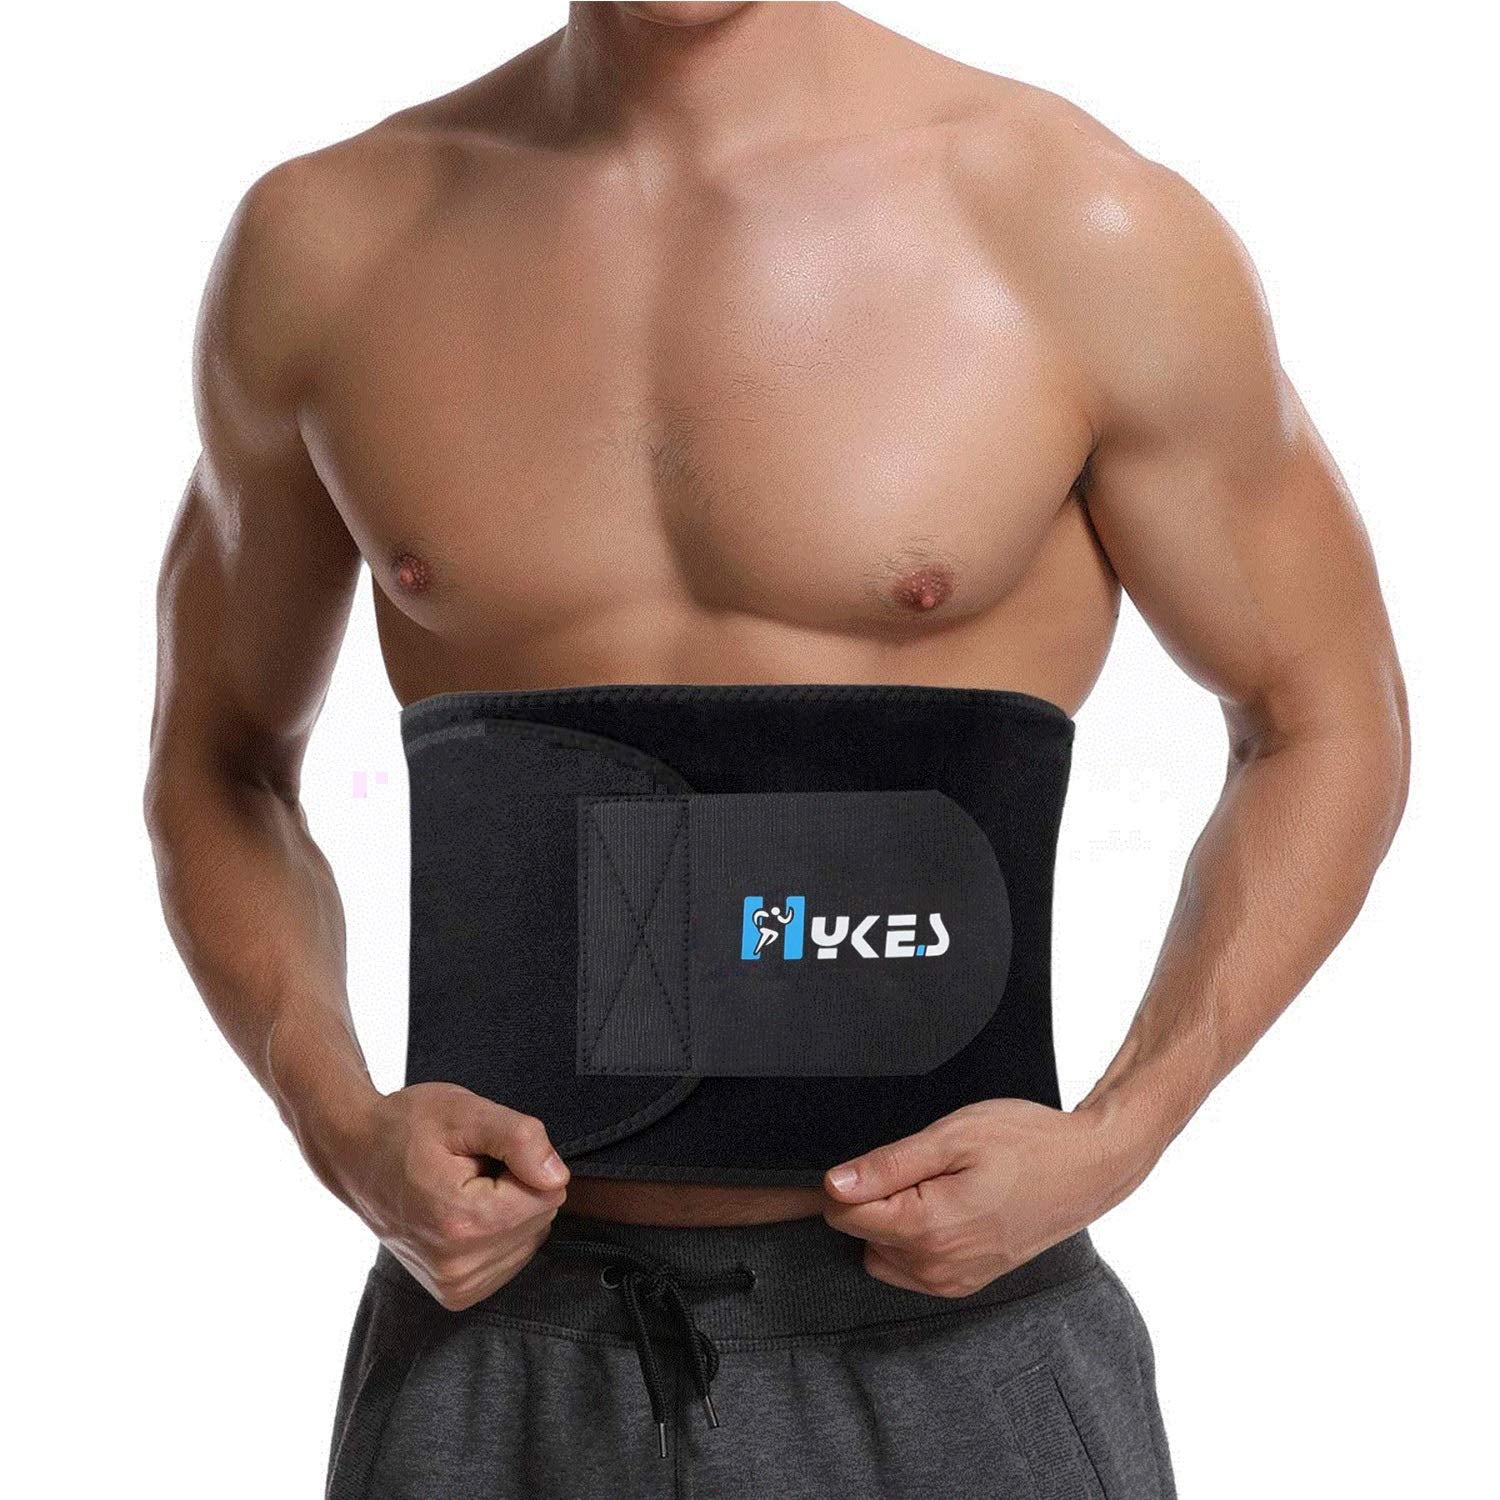 Buy Get In Shape Advanced Slimming Belt Online at Best Price in India on